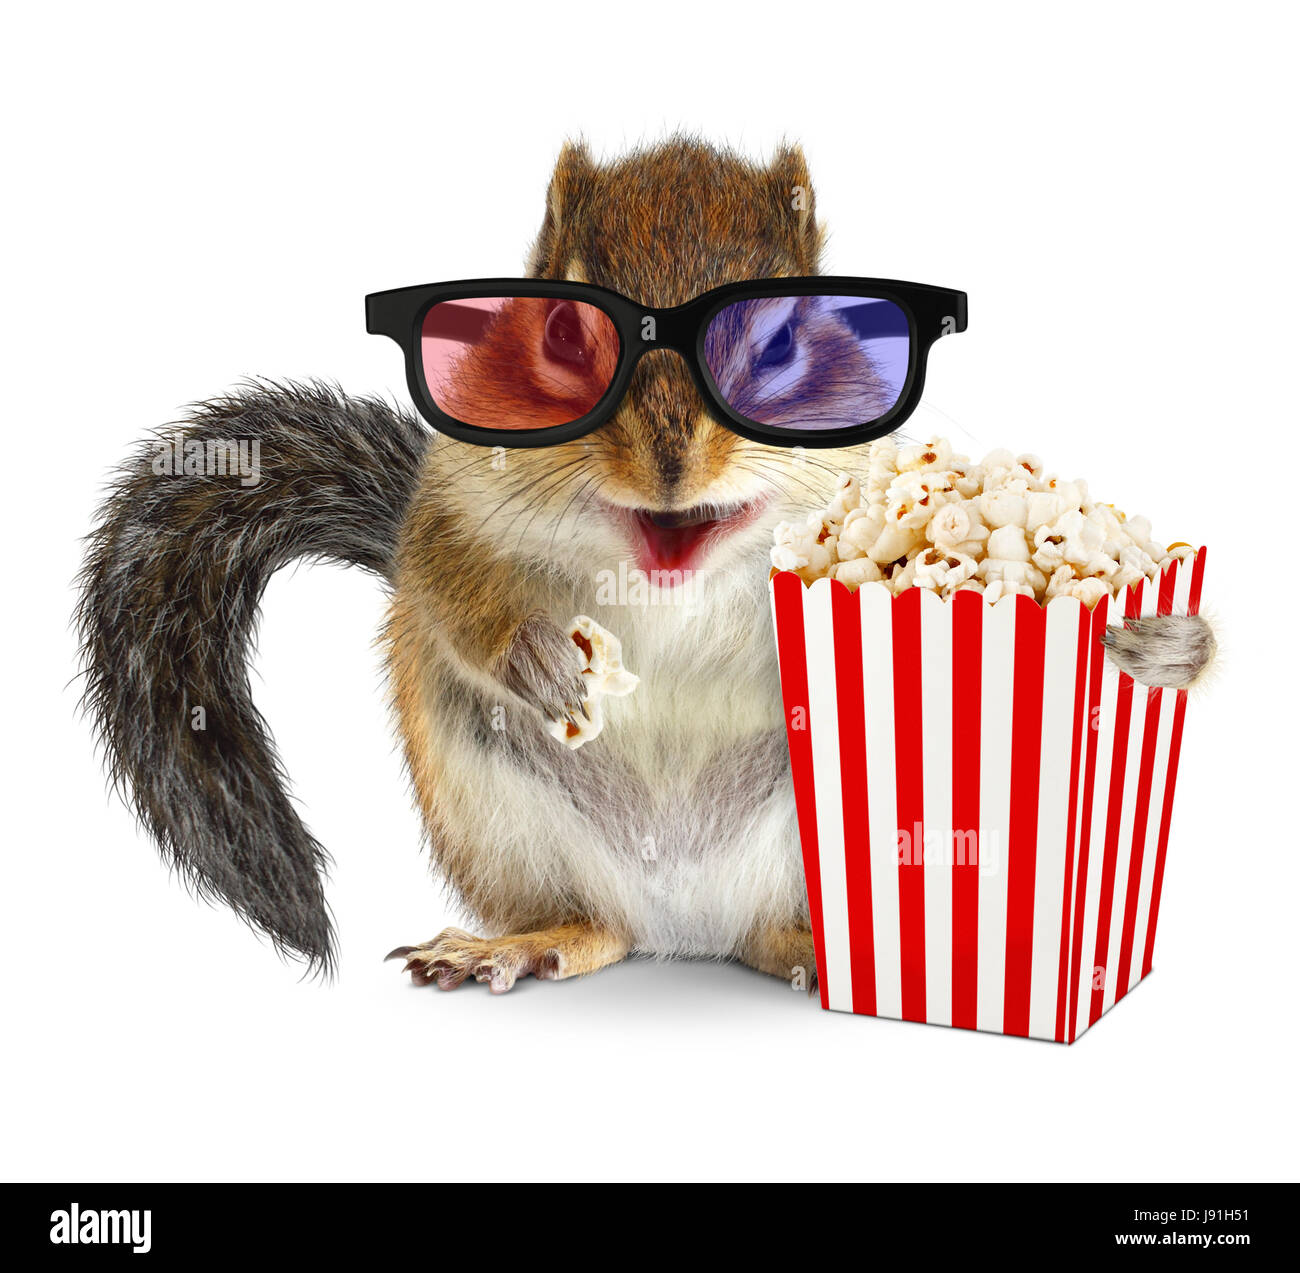 Funny animal chipmunk watching movie with popcorn and glasses Stock Photo